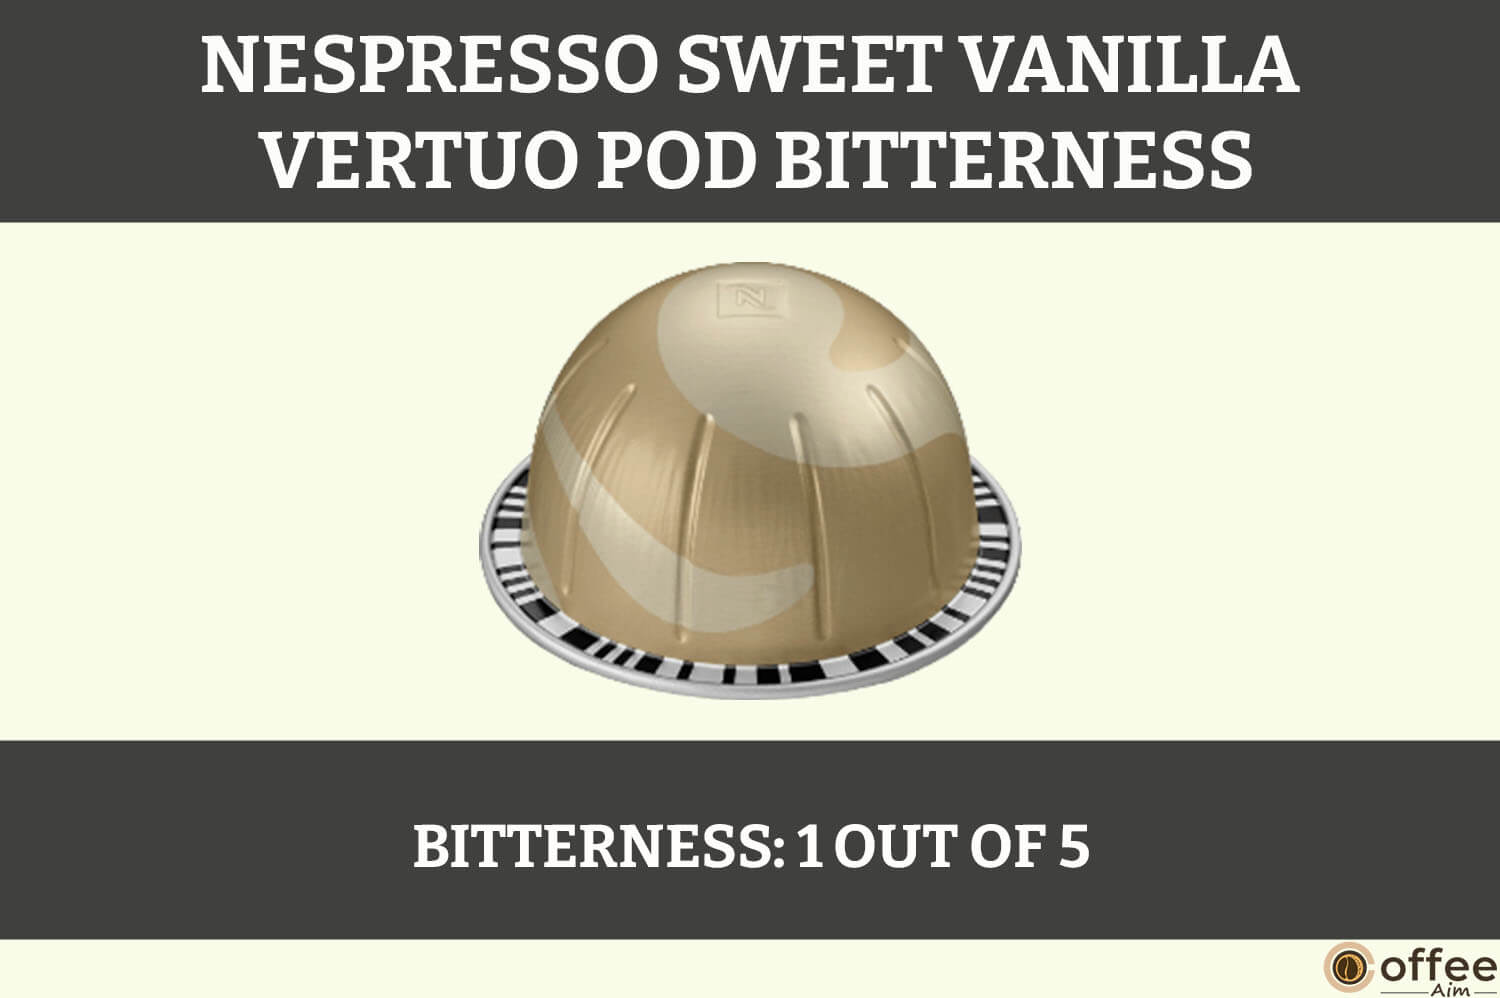 This image captures the essence of the Nespresso Sweet Vanilla Vertuo Pod, illustrating its distinctive flavor profile for the article titled 'Nespresso Sweet Vanilla Vertuo Pod Review'